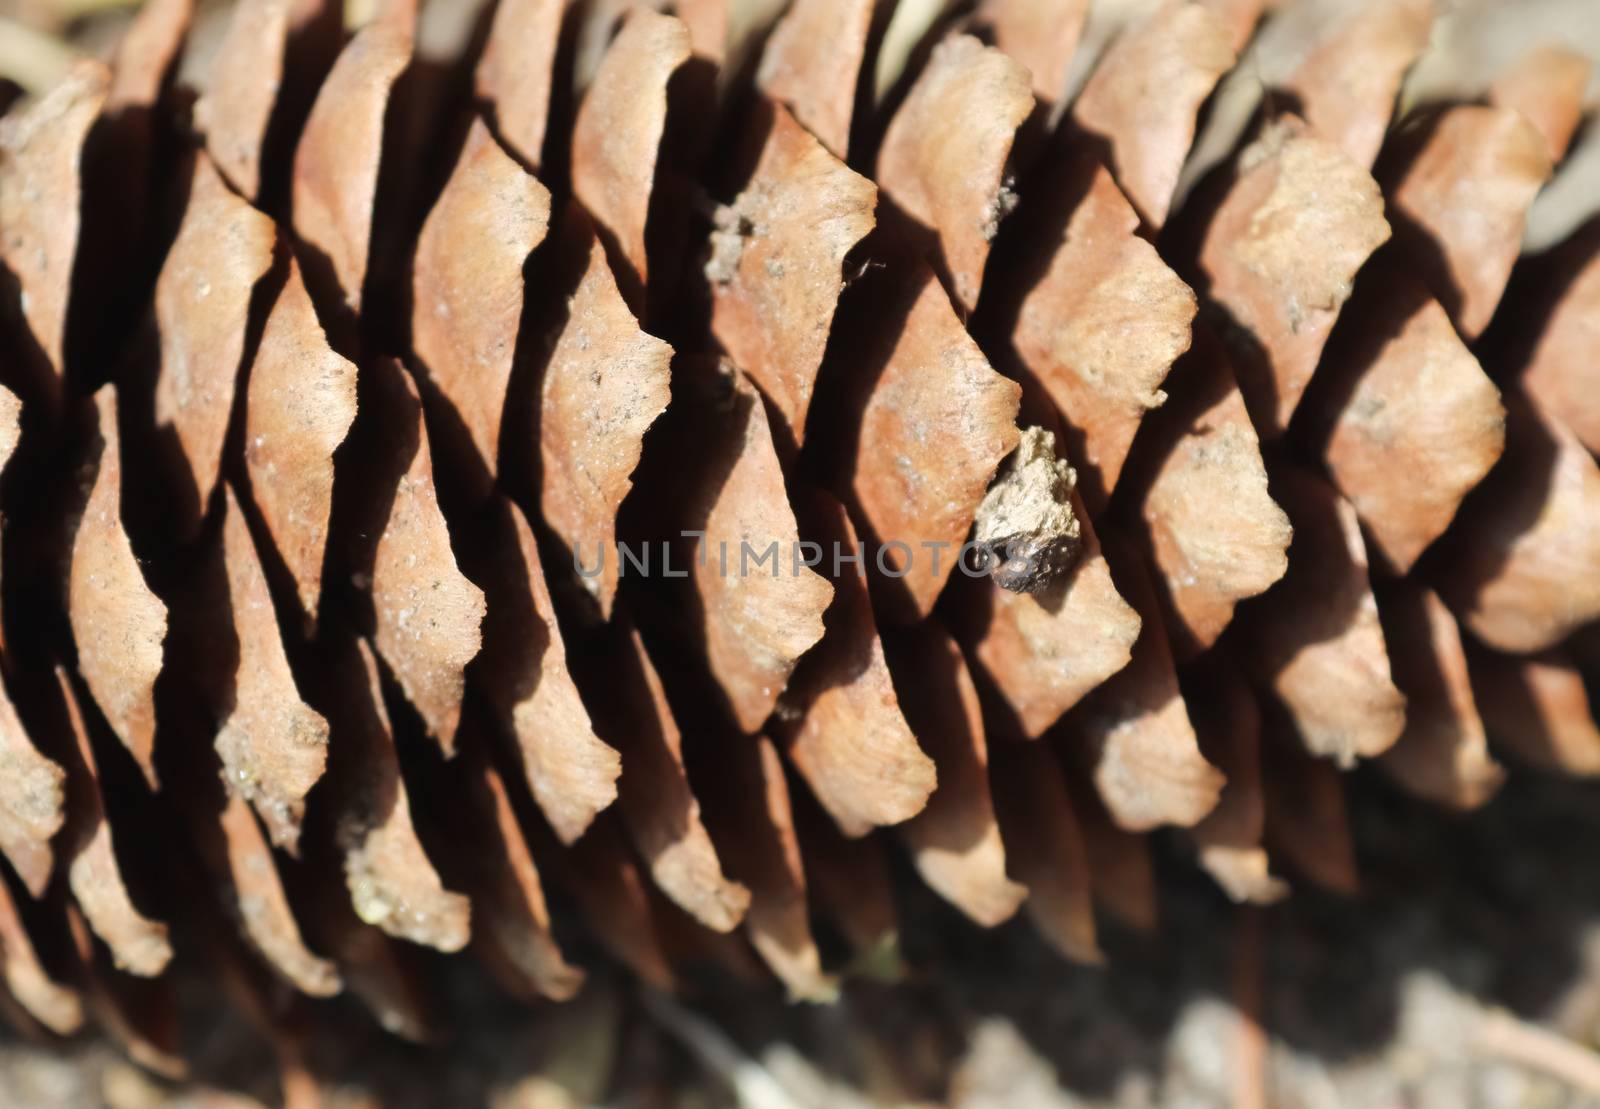 One long pine cone laying on the ground with brown needles on the forest ground